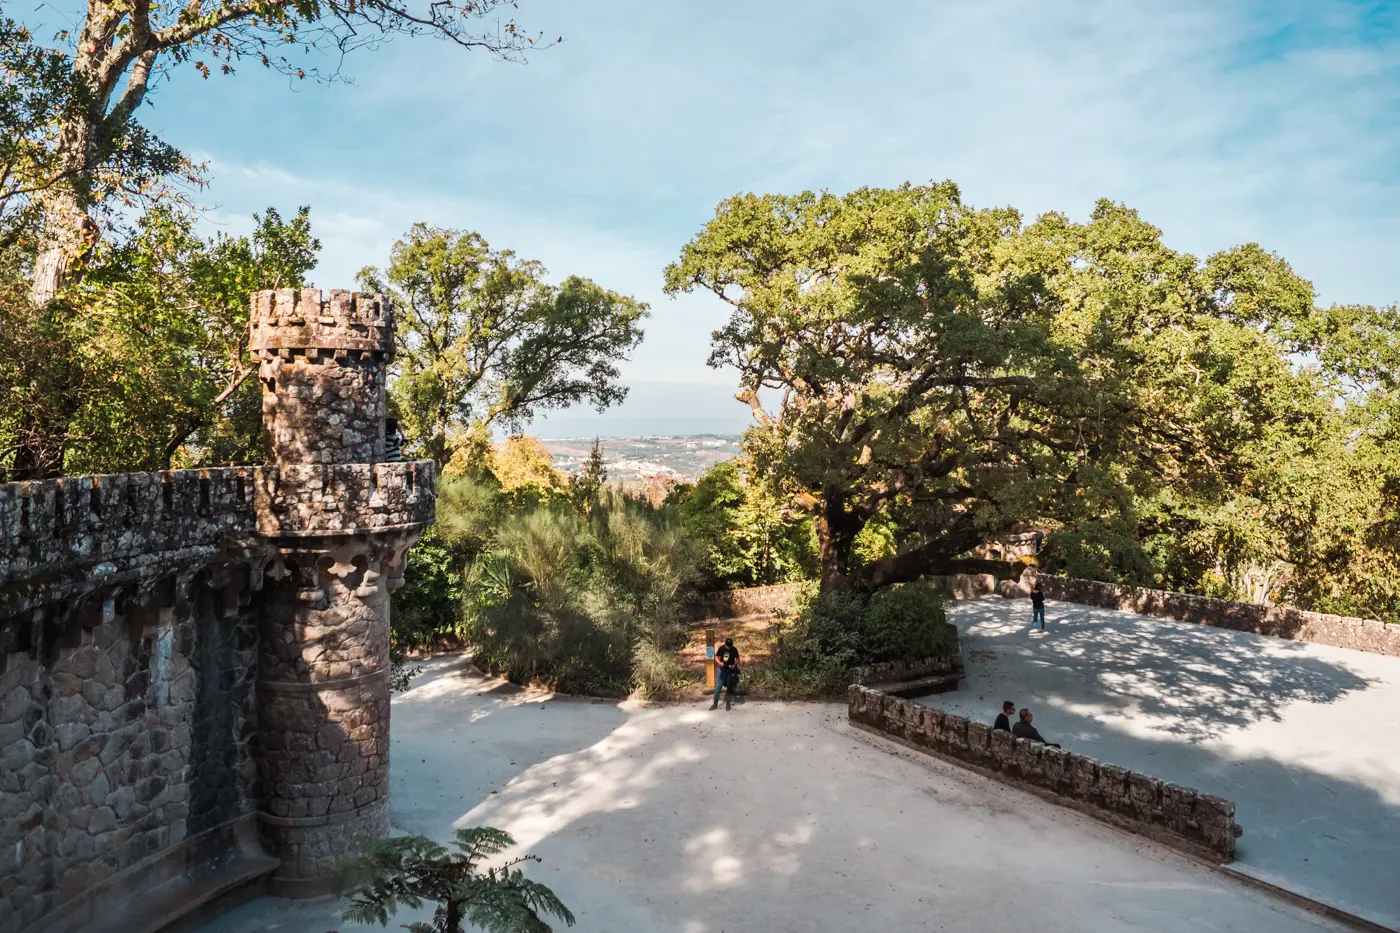 Medival looking stone wall with small tower to the left, open area with light grey gravel surrounded by green trees at Quinta da Regaleira, the most beautiful palace in Sintra.